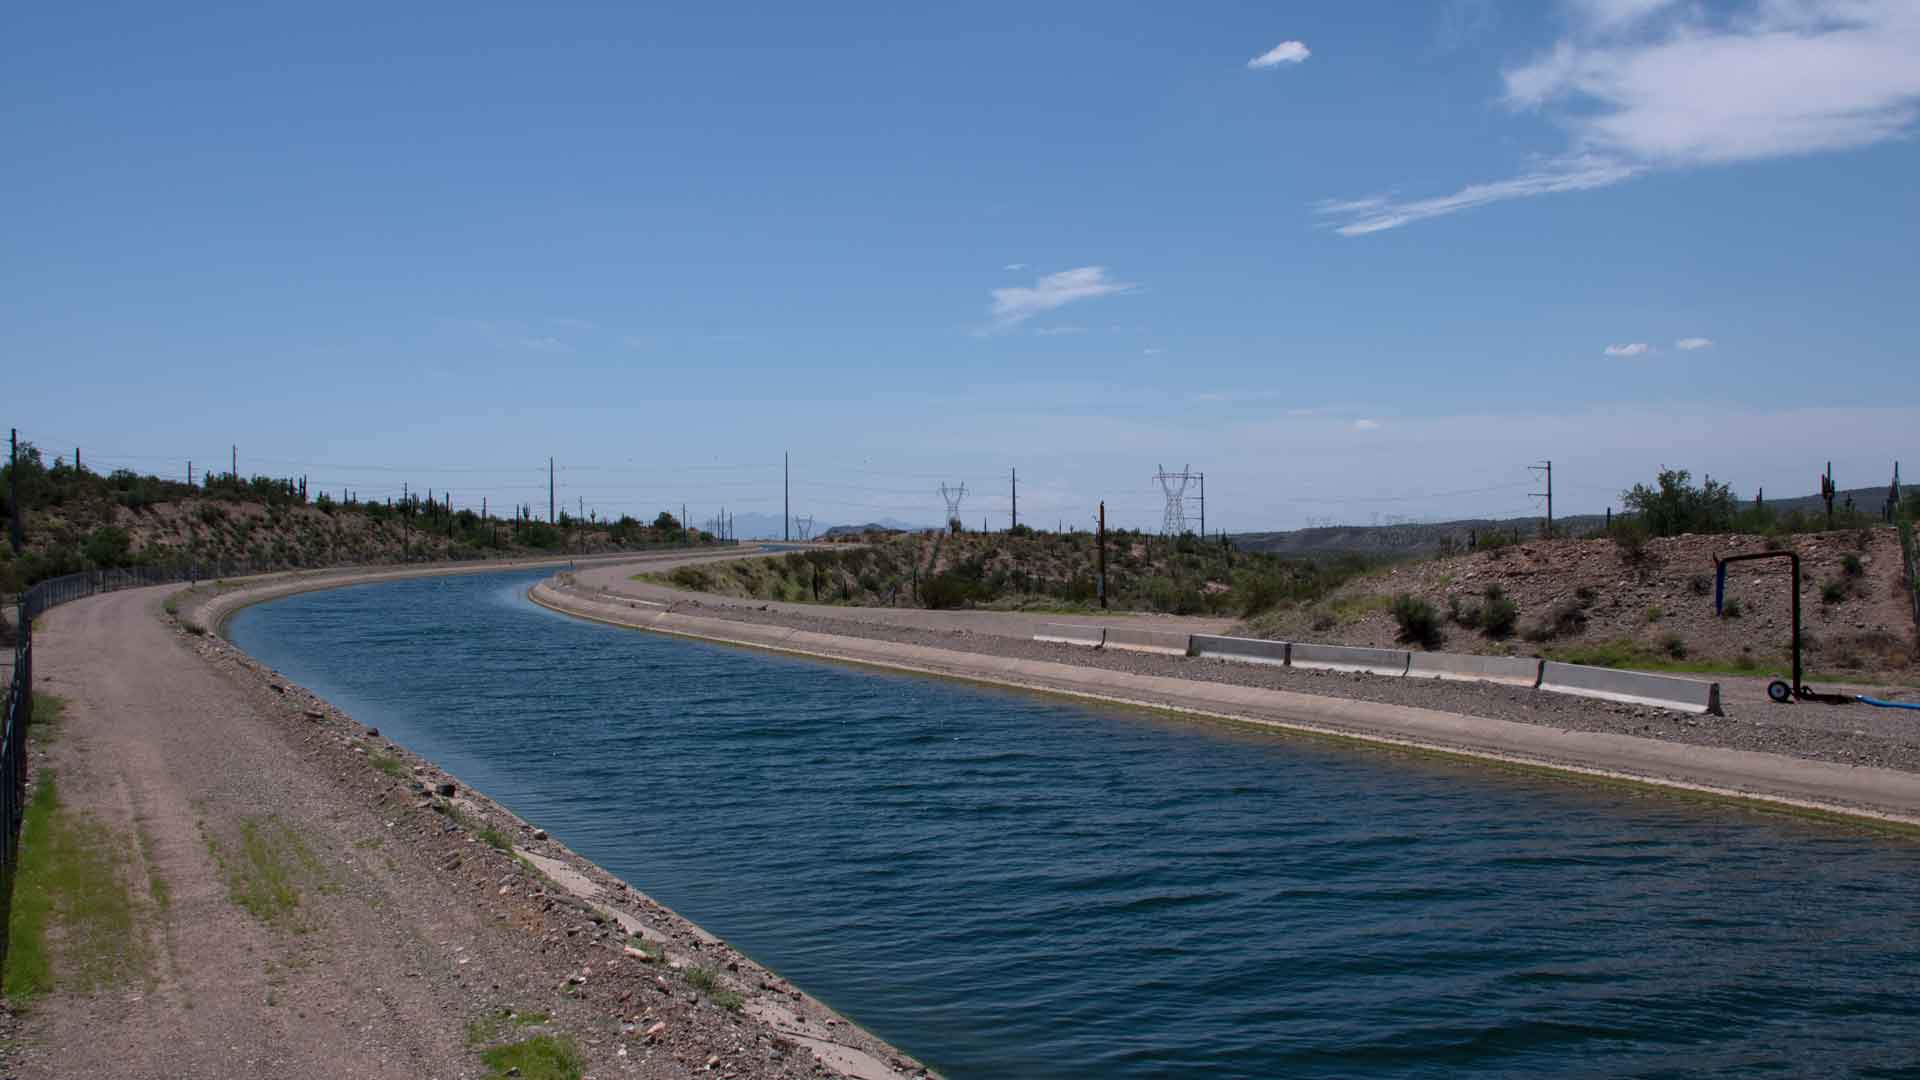 The Central Arizona Project canal north of Phoenix moves water from Lake Pleasant to southern Arizona. July 2021